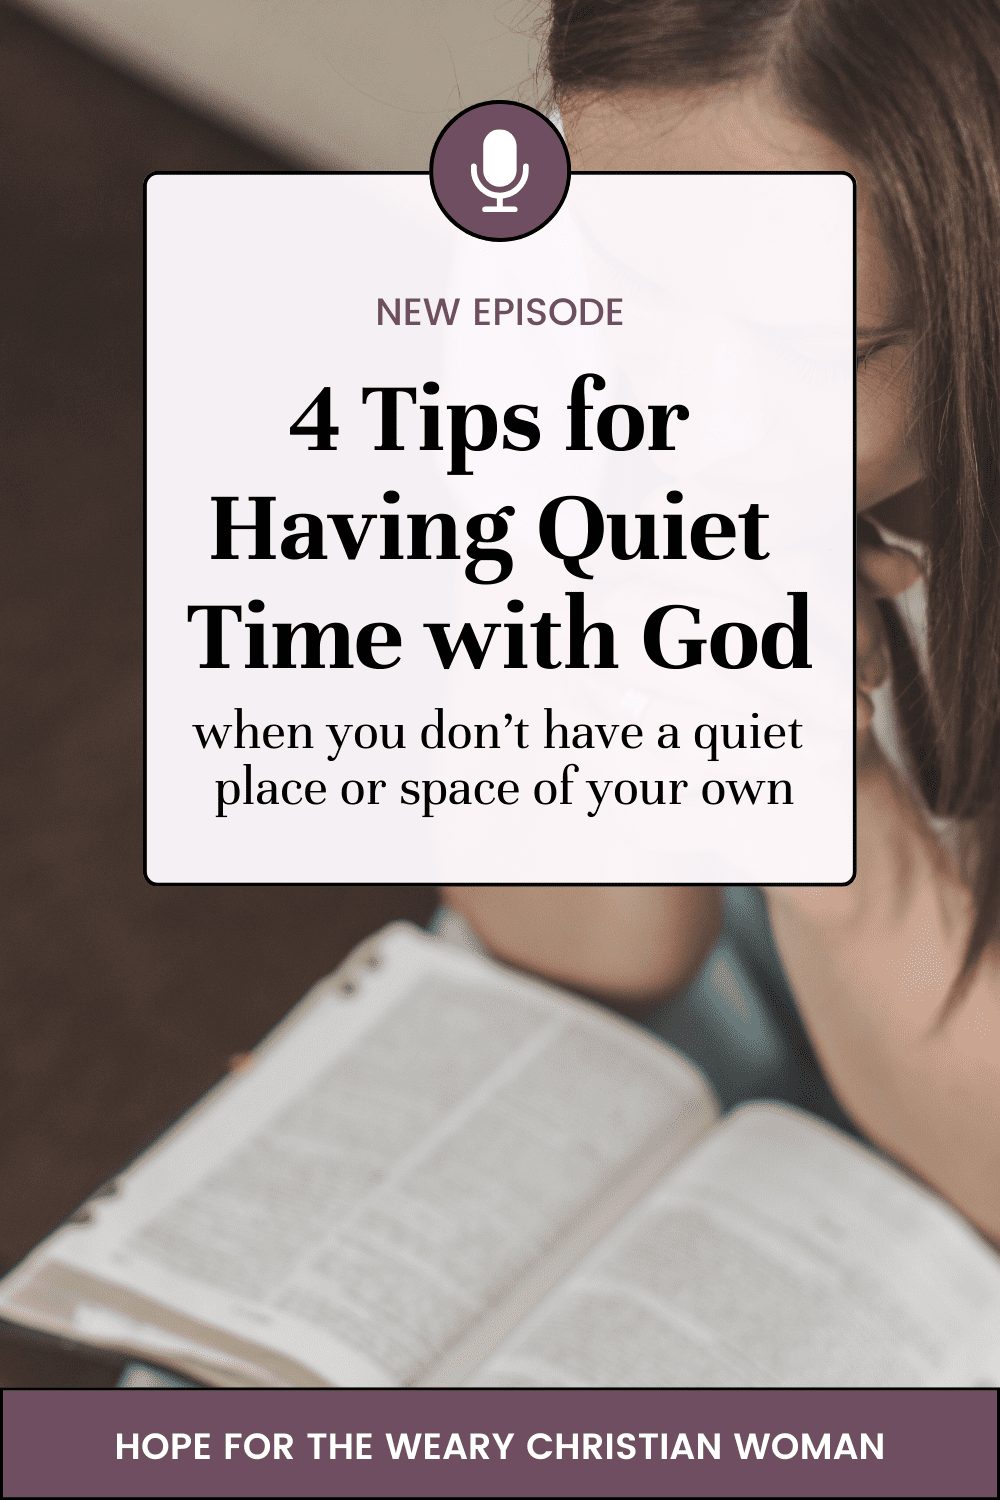 Are you struggling to find a place for your quiet time with God? Here are four tips to be consistent with your prayer life and bible study- without having a quiet place of your own. Plus, tips about how to grow your faith in God.